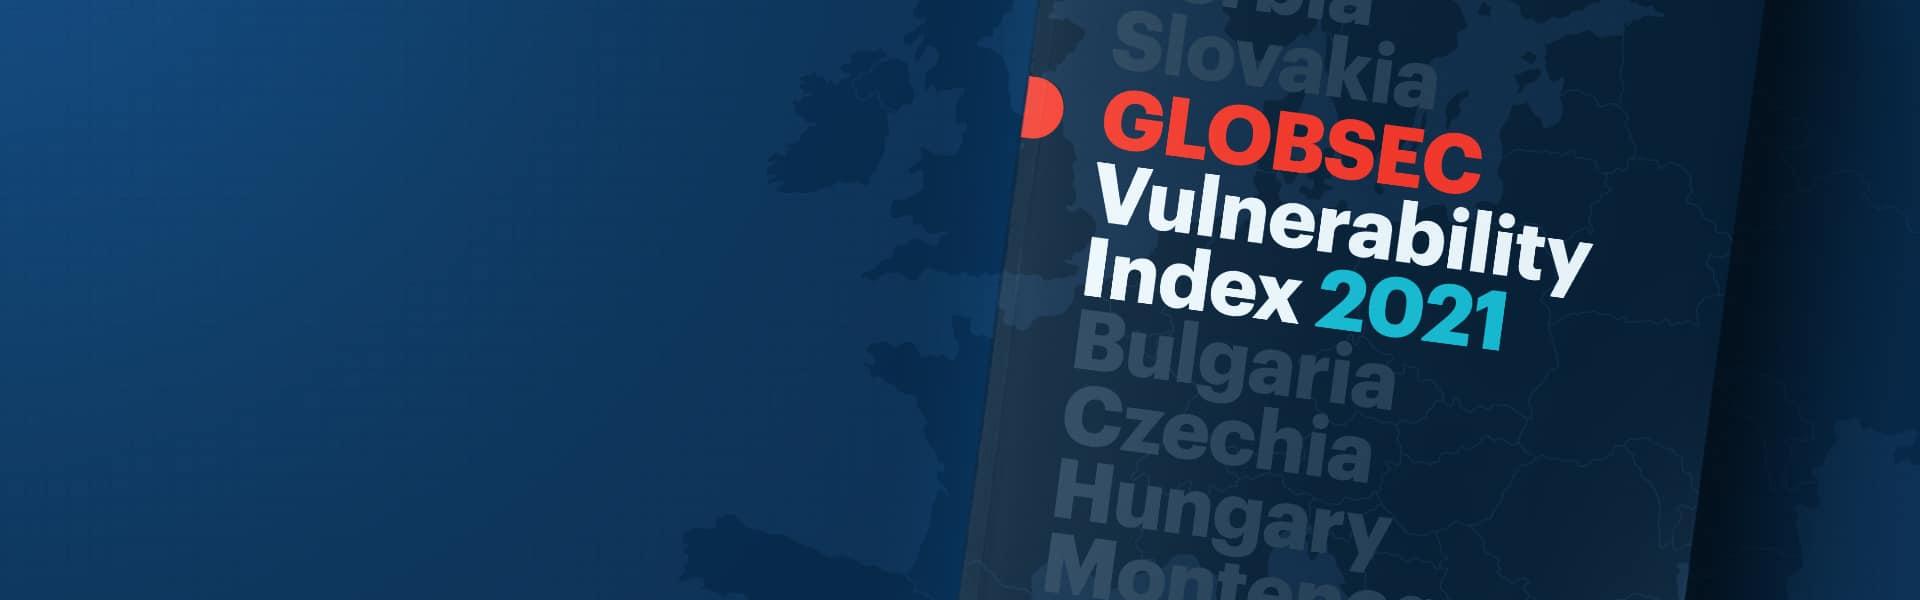 Globsec Vulnerability Index Cover